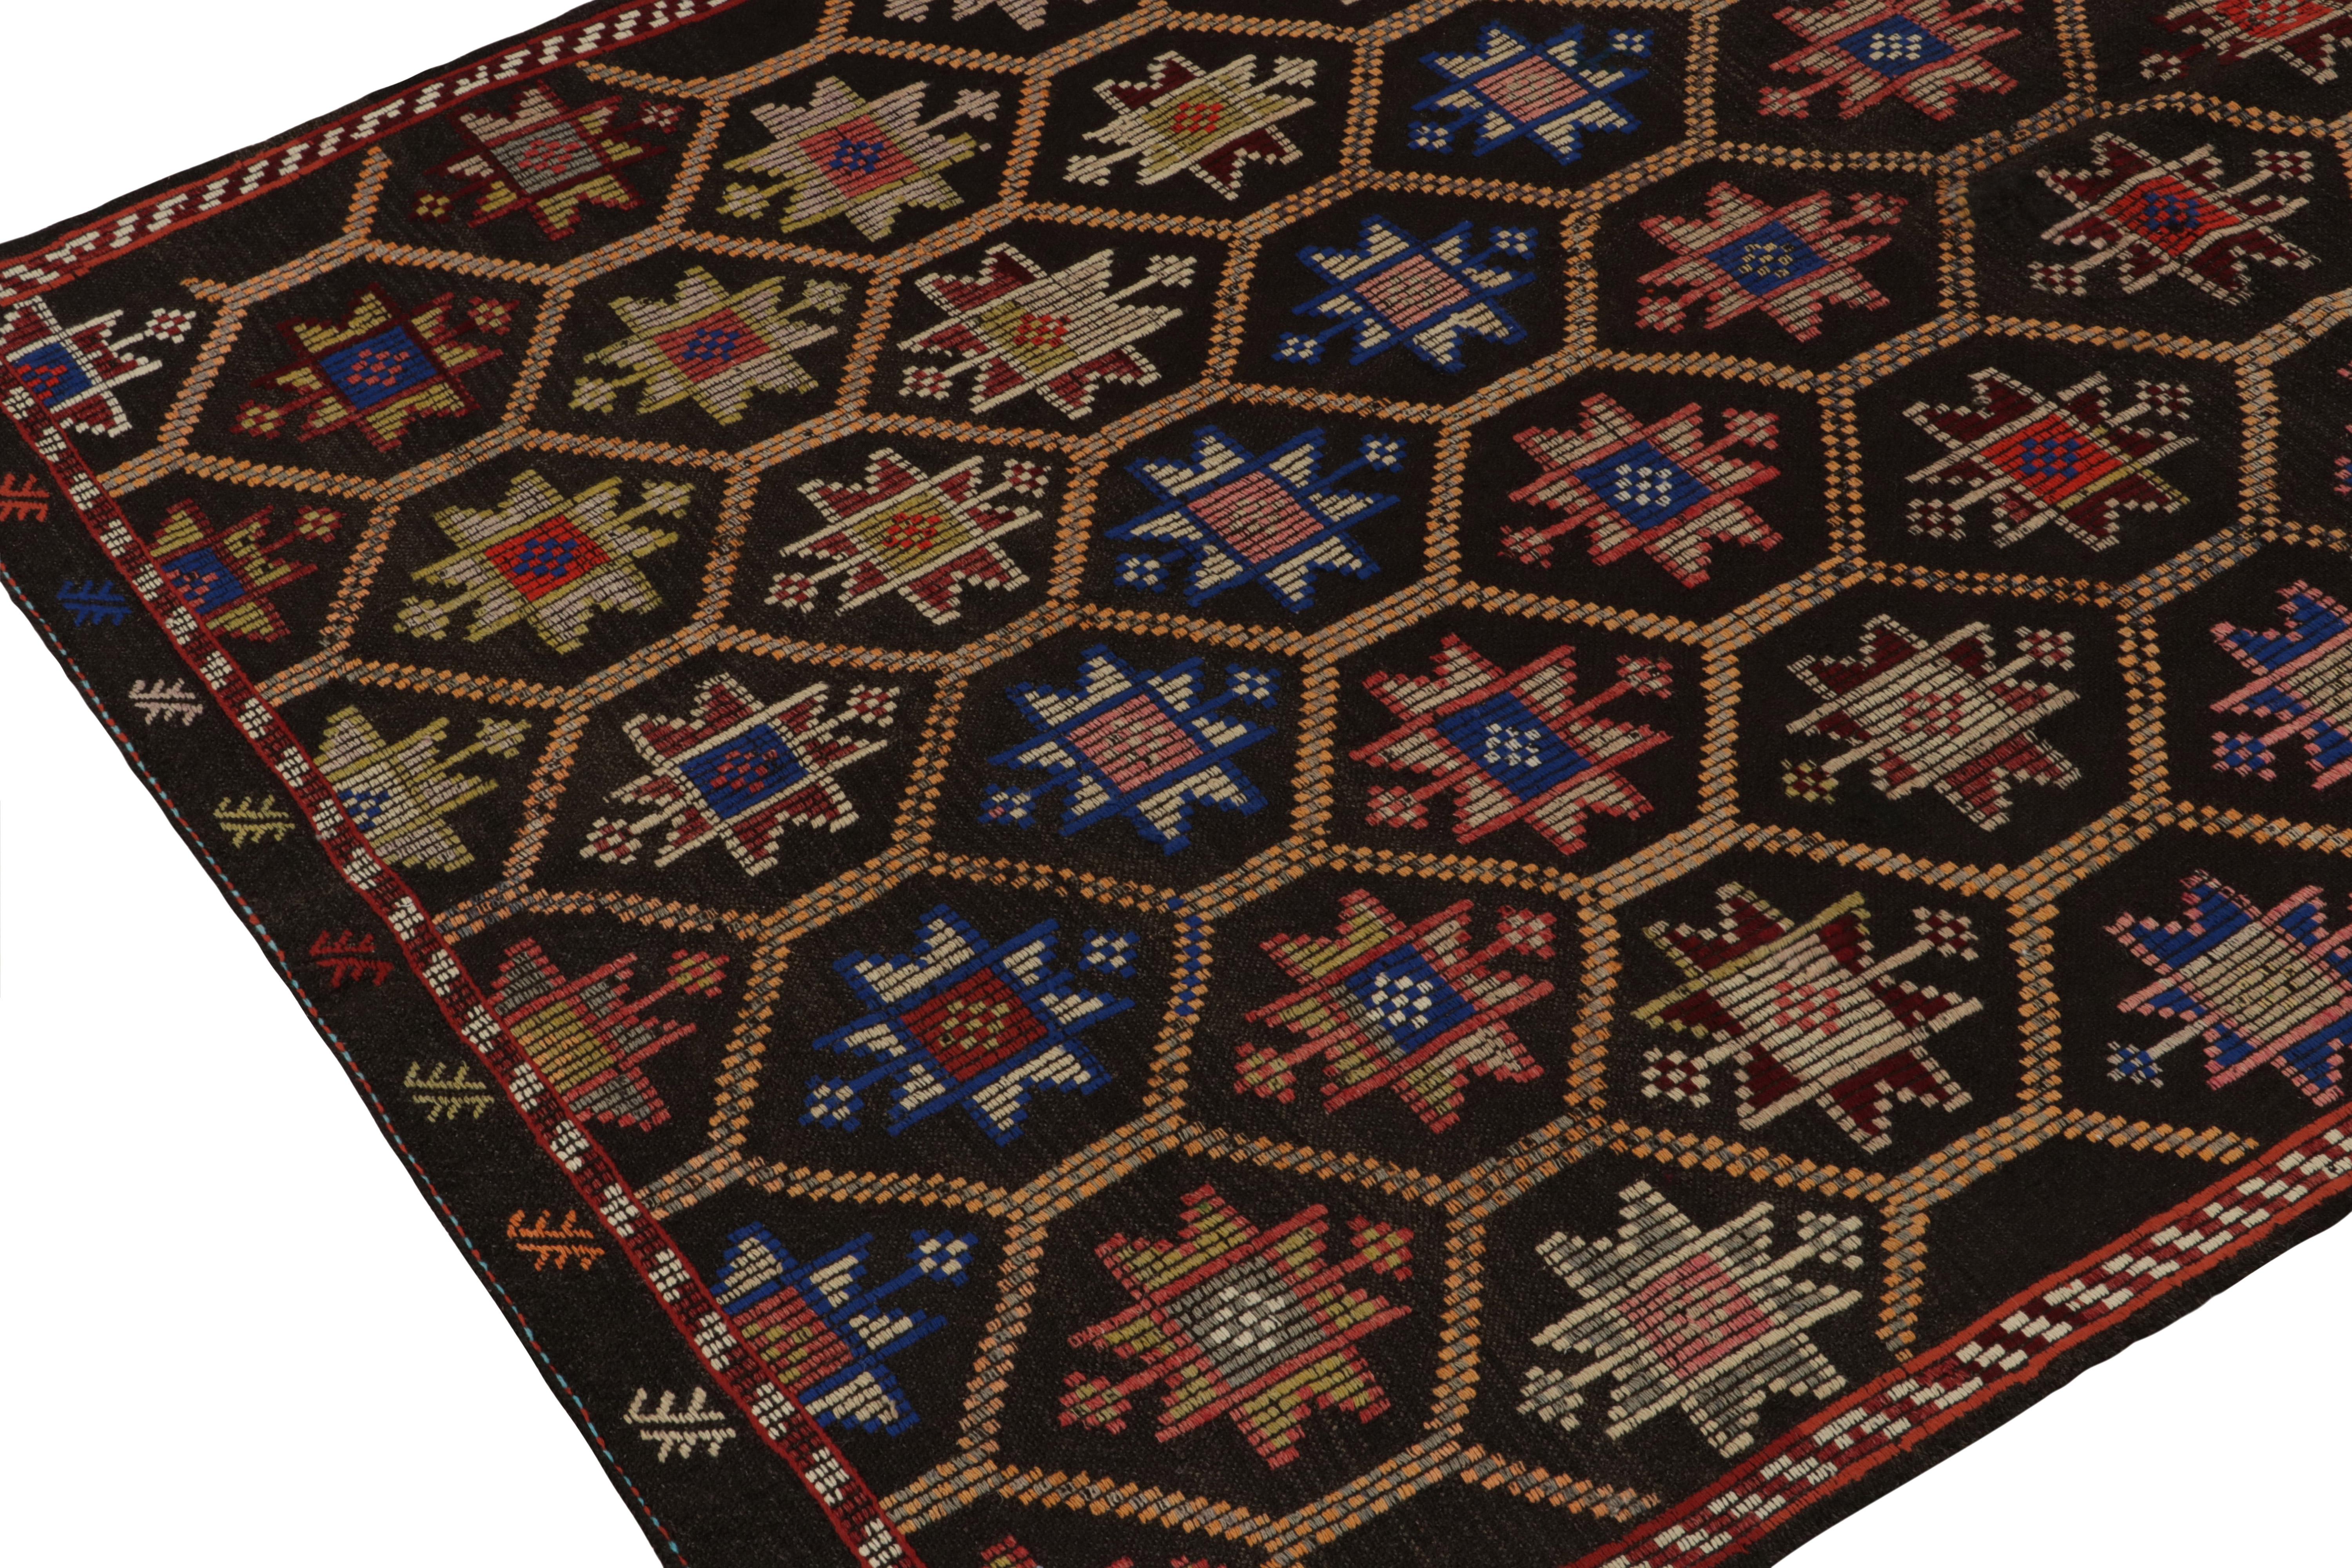 Hand-Knotted Vintage Cecim Kilim, Tribal Rug in Brown, Red and Blue Patterns by Rug & Kilim For Sale